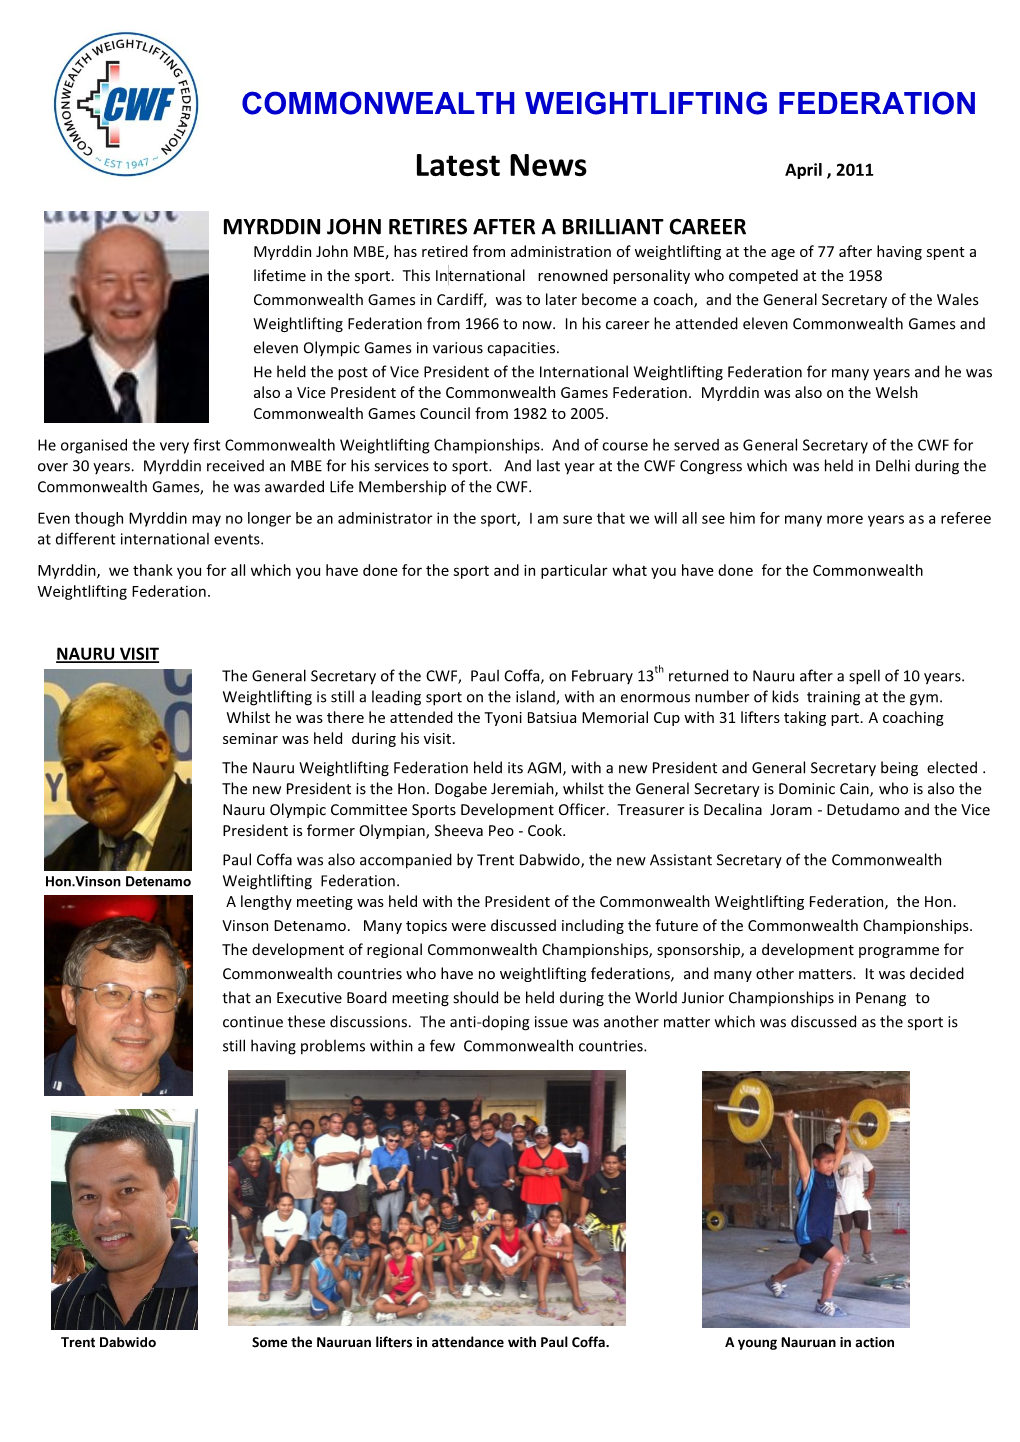 COMMONWEALTH WEIGHTLIFTING FEDERATION Latest News